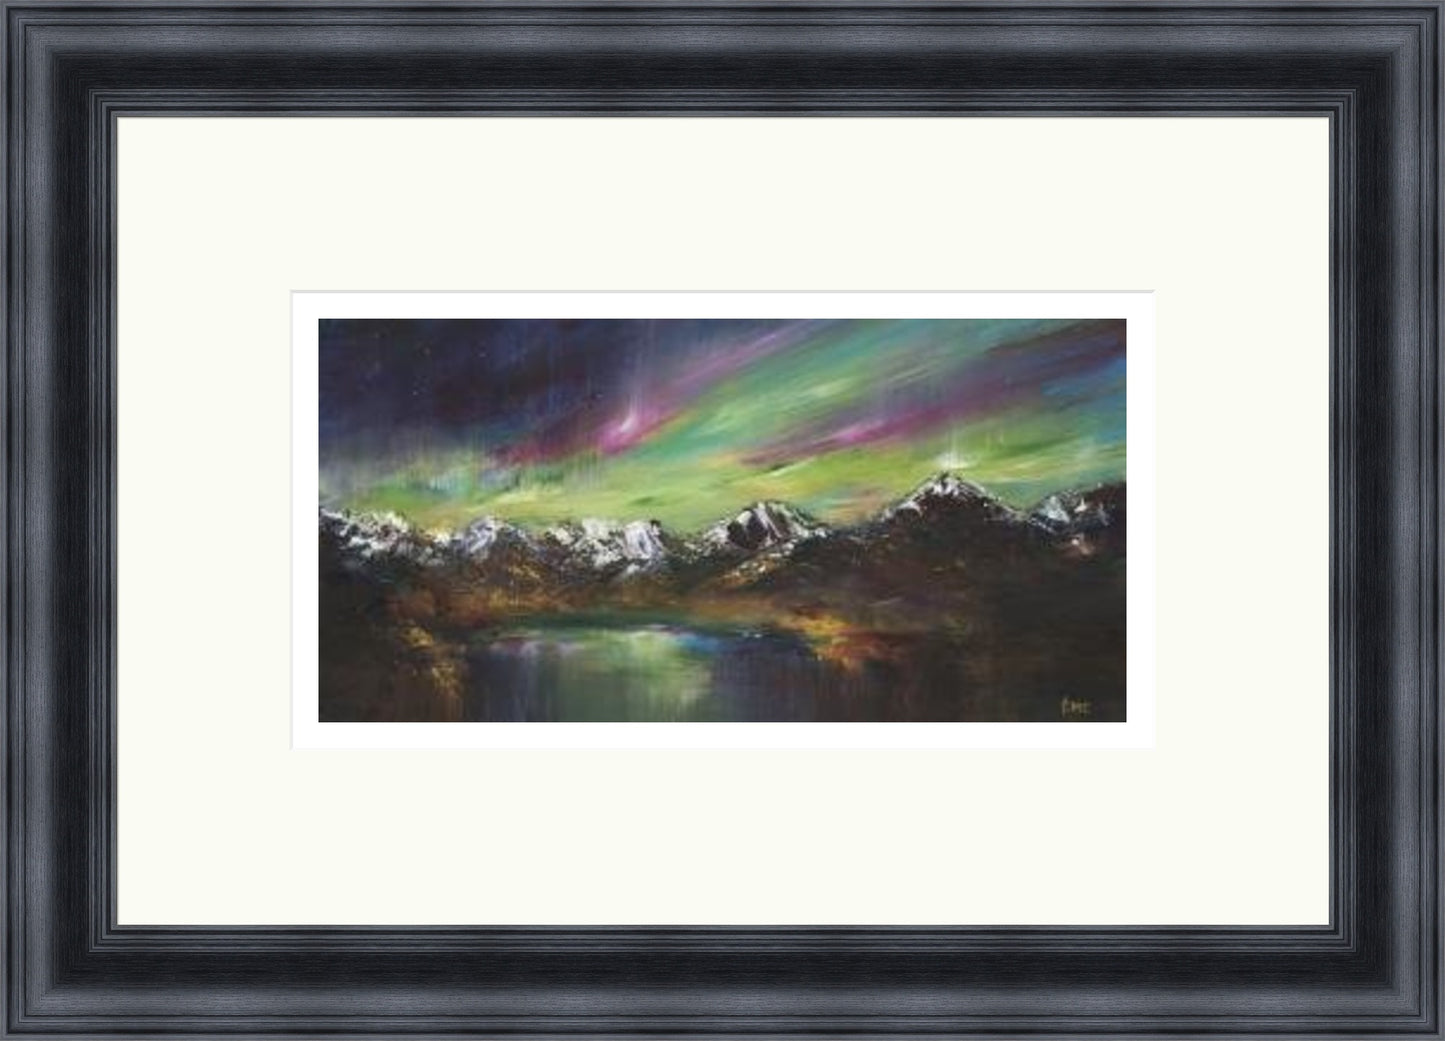 Northern Lights come to Rannoch by Grace Cameron